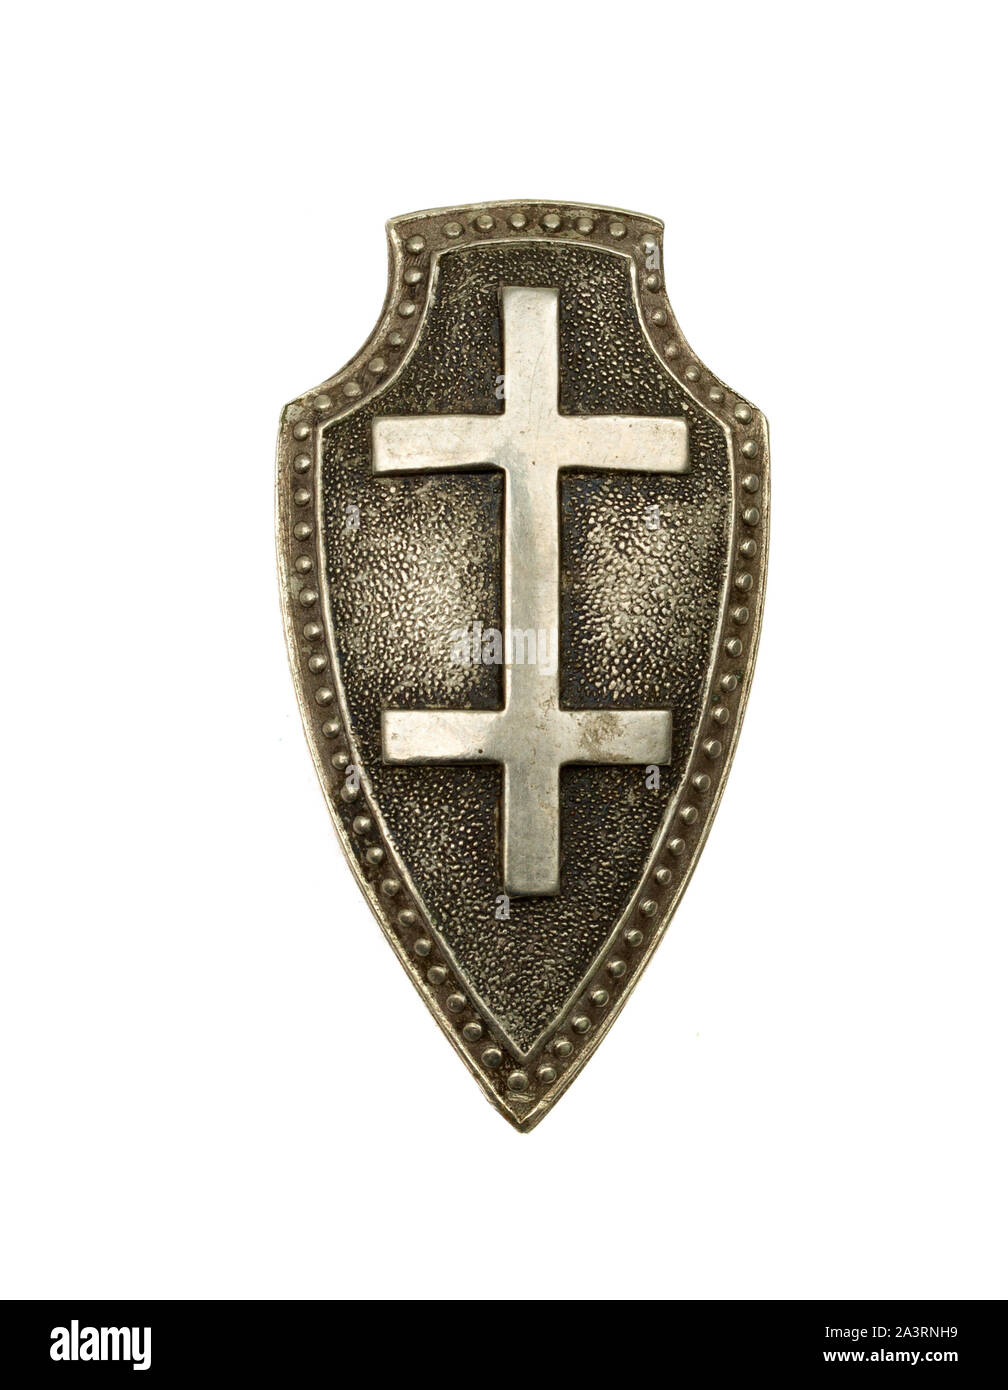 Slovakian badge shield with cross. Period of the Second World War. Stock Photo